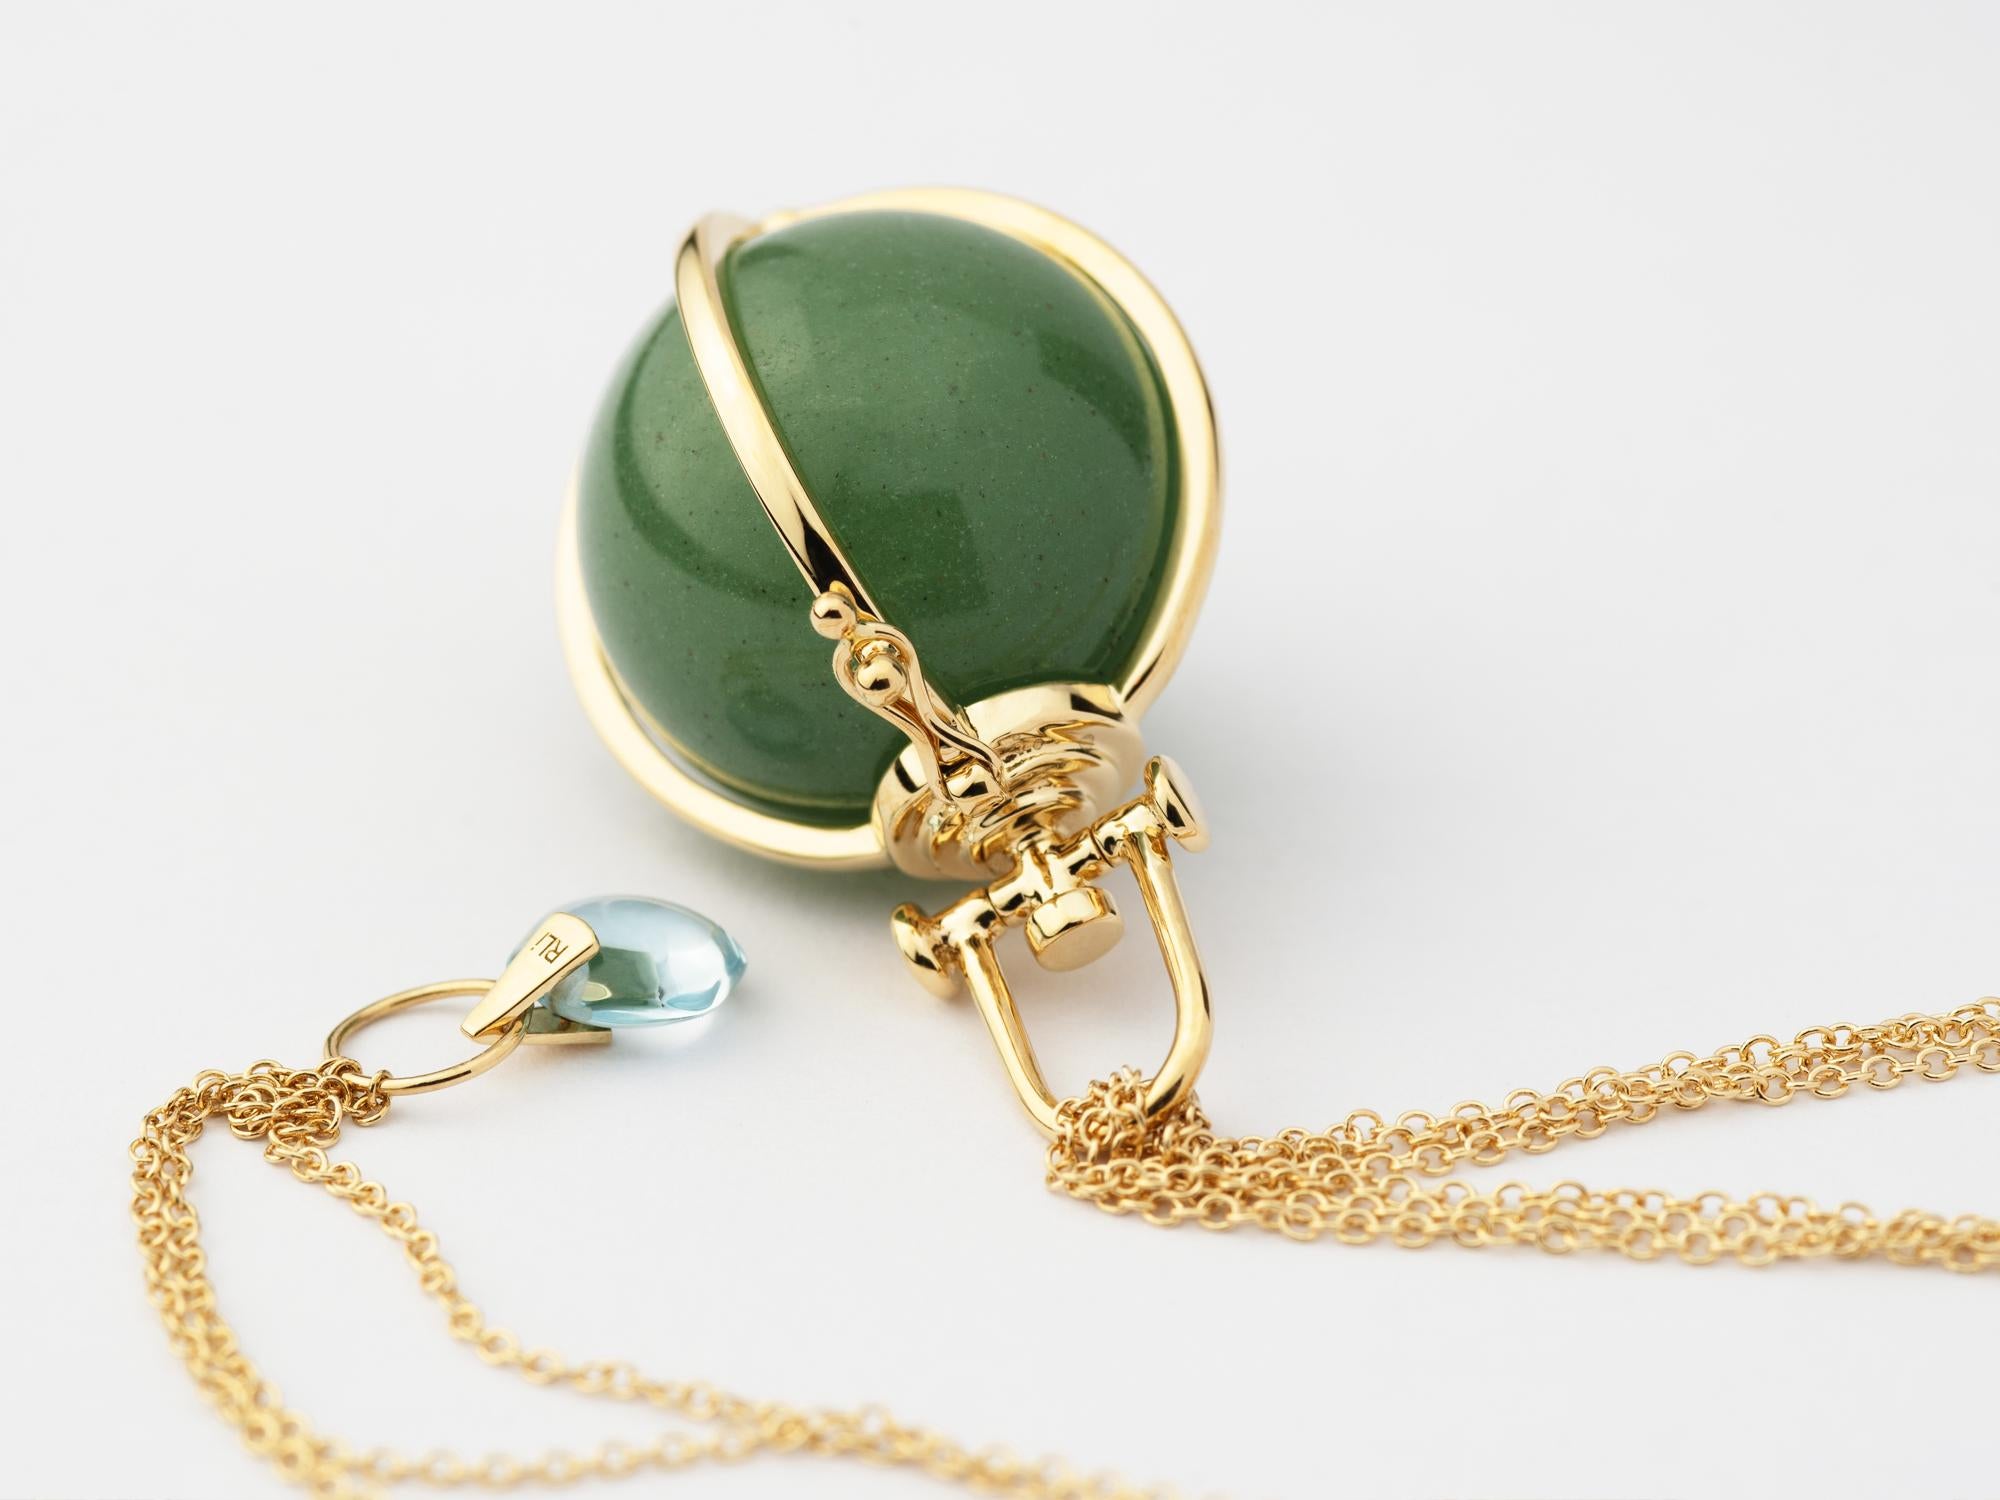 Rebecca Li designs Mindfulness. 
This bold stone orb necklace is from her Crystal Orb Collection. The main design element used is the sacred geometry circle. It represents oneness. 
Natural aventurine means manifestation, healing and